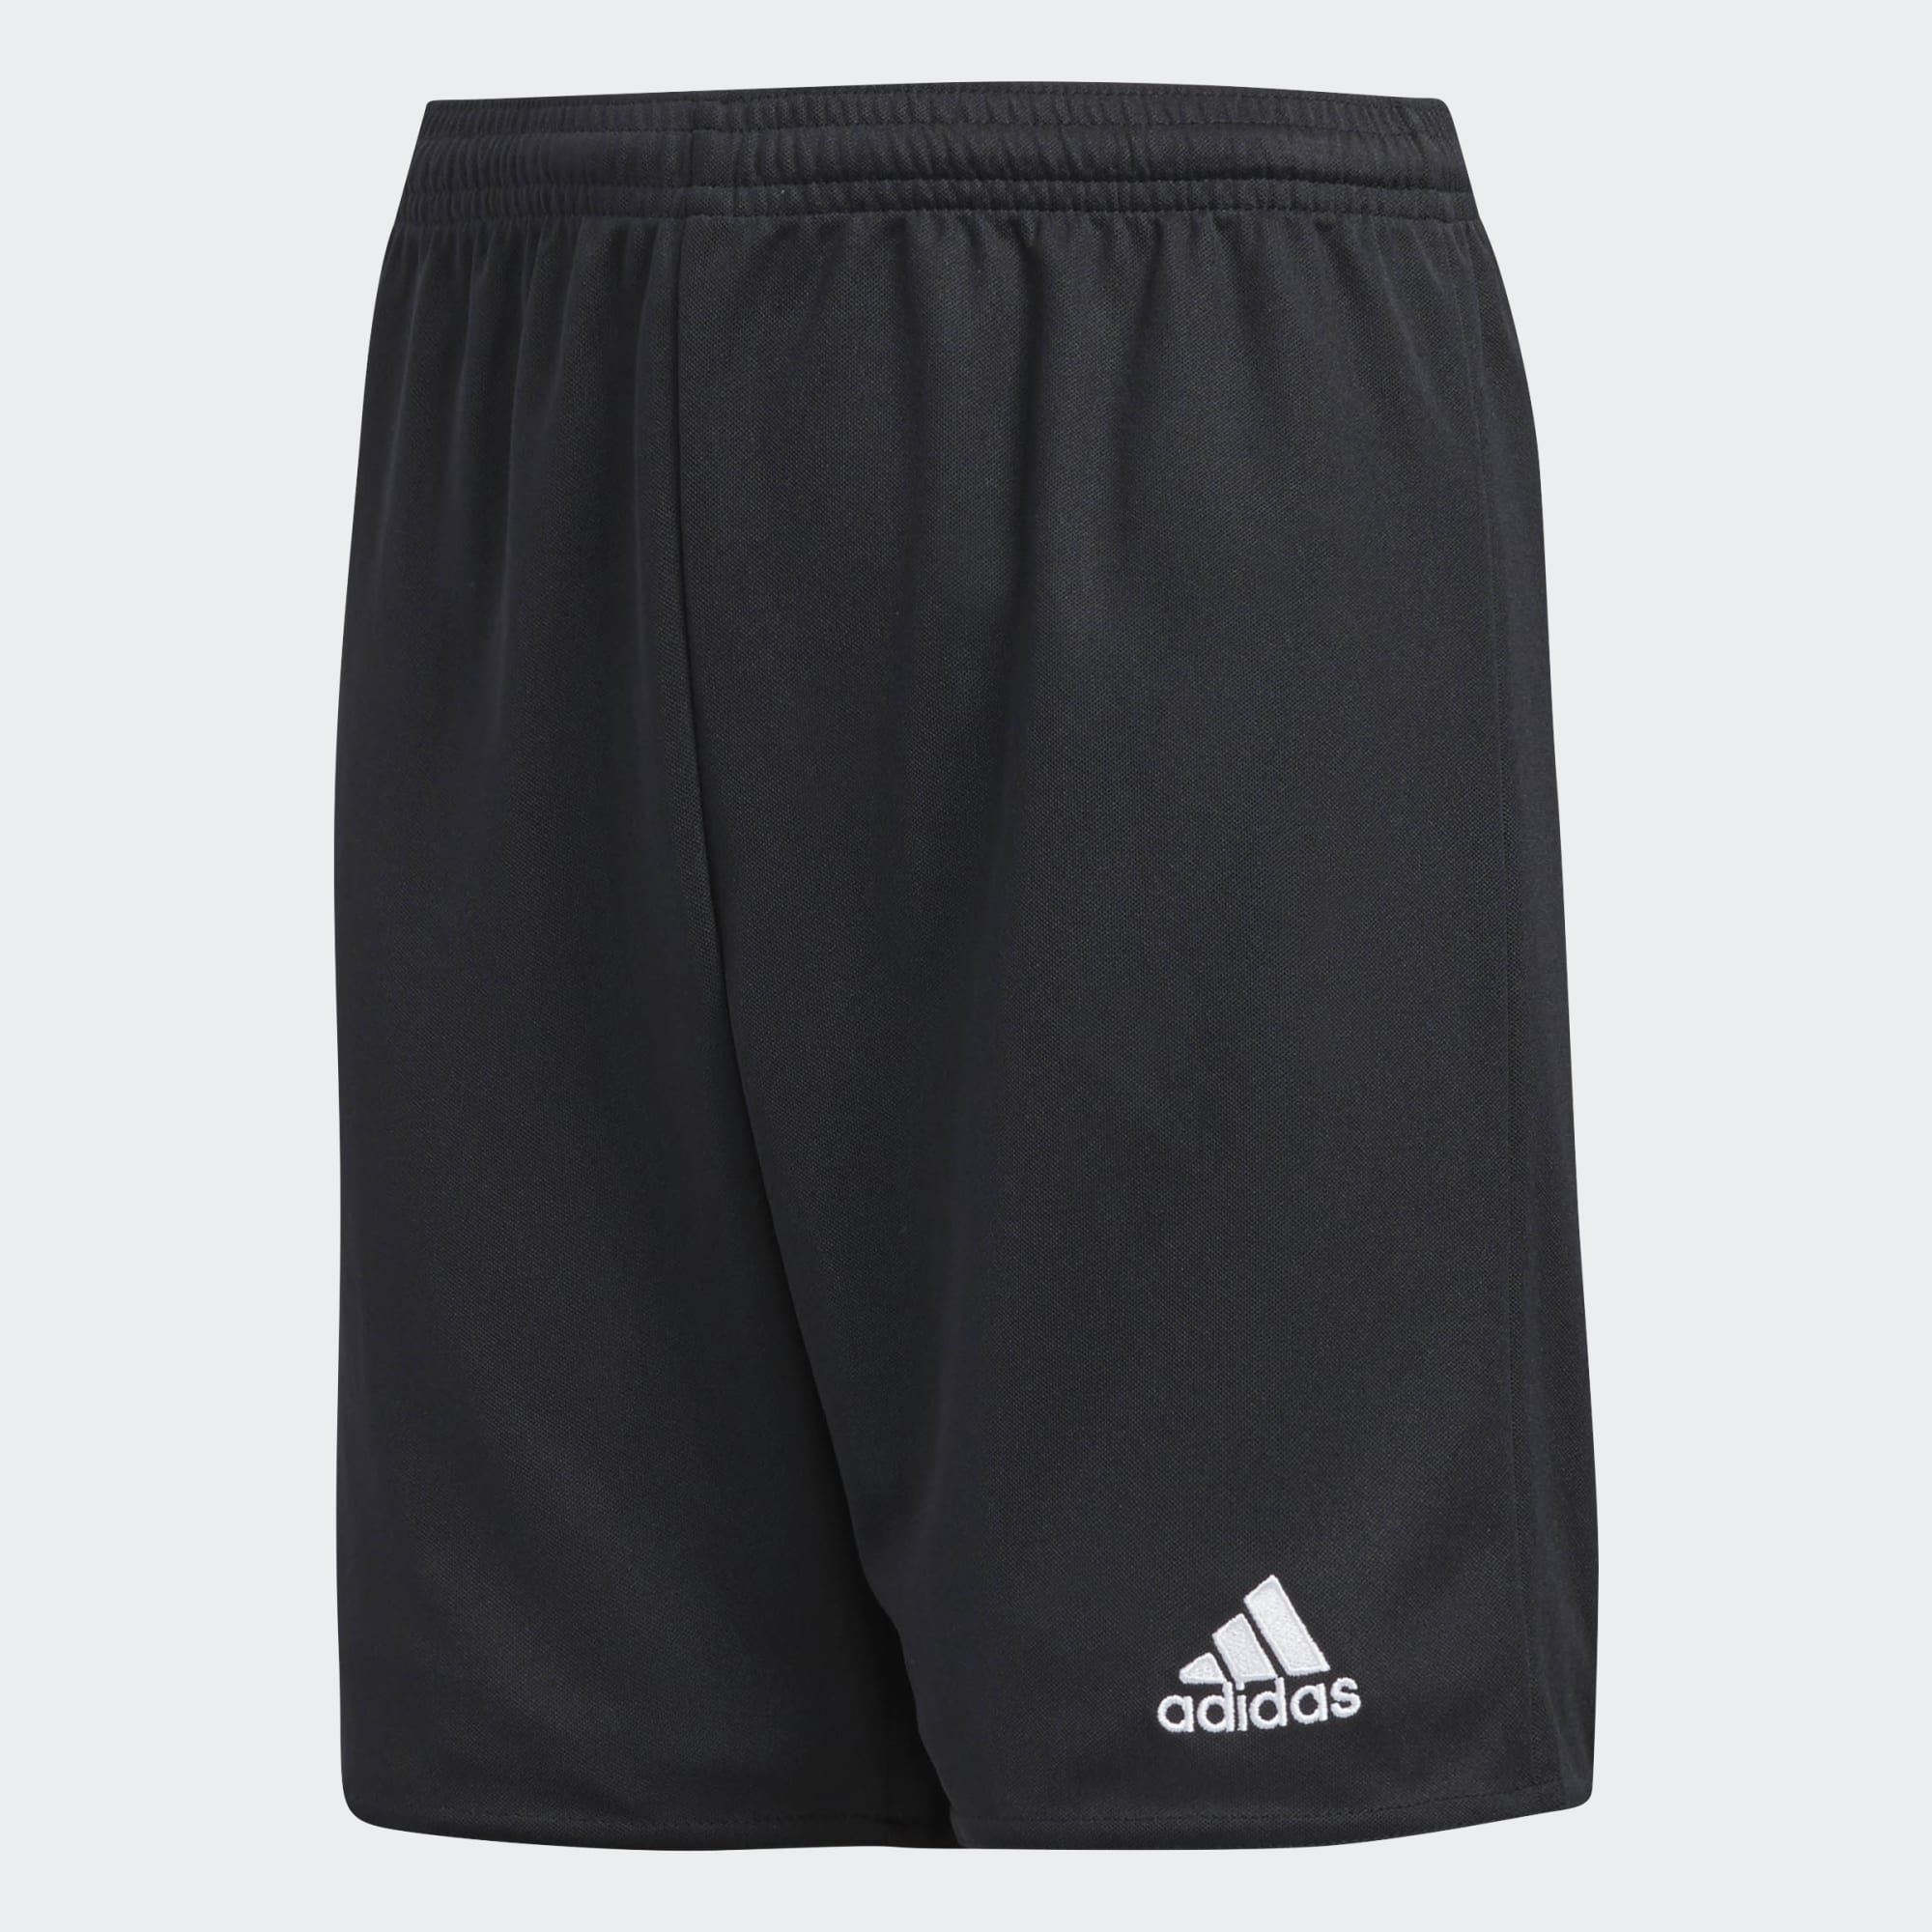 Adidas Parma 16 Youth Shorts-ADIDAS-Sports Replay - Sports Excellence